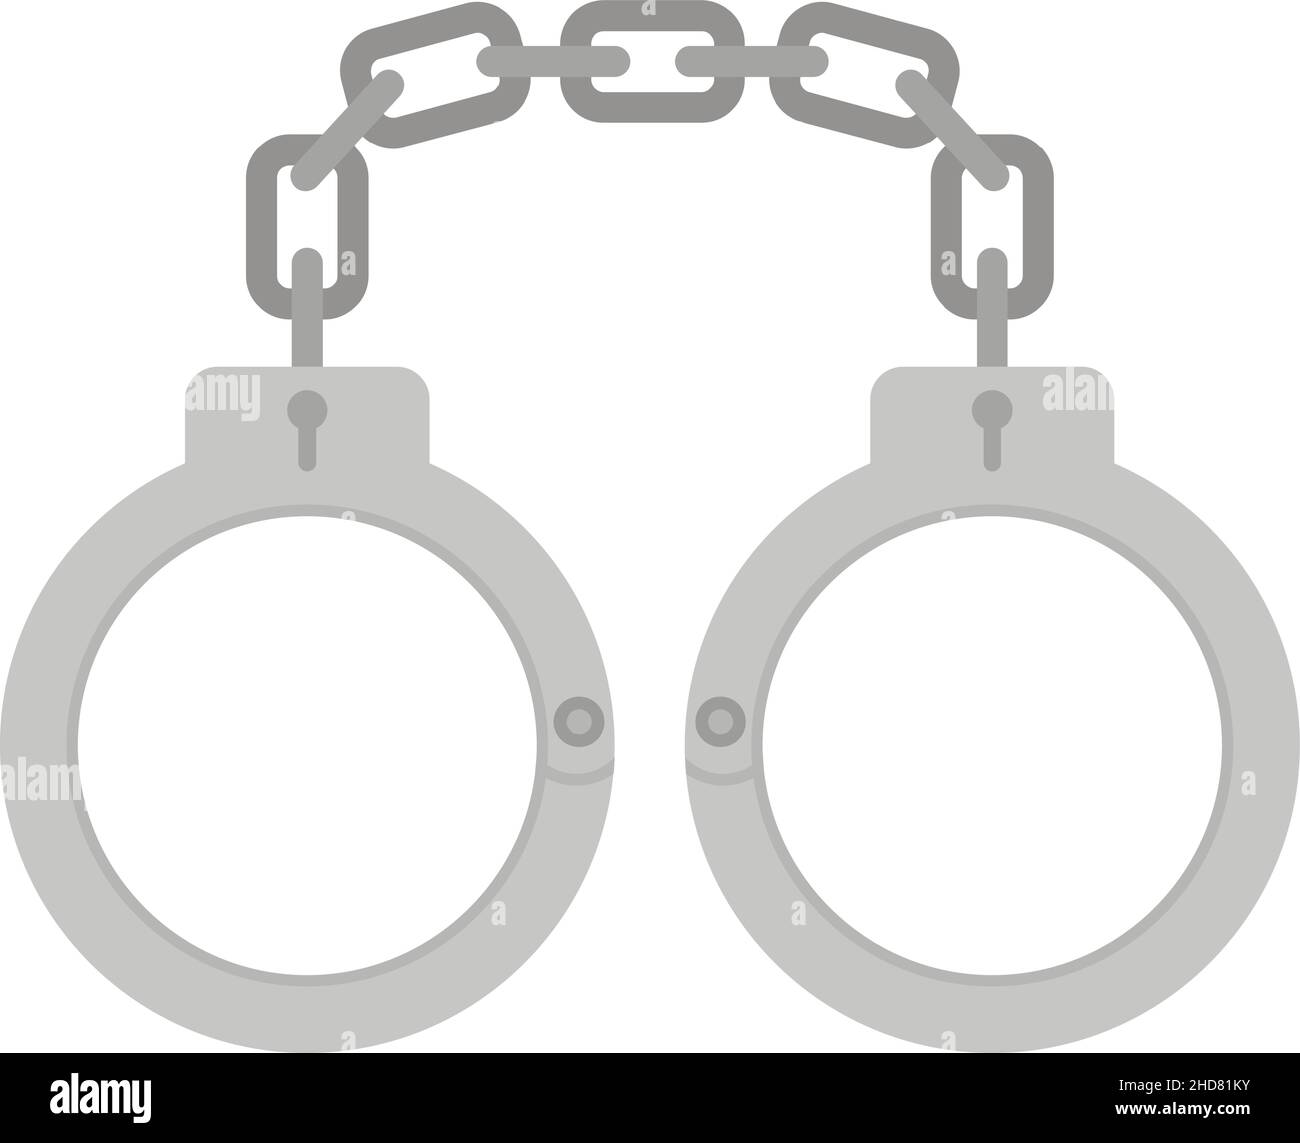 Policeman handcuffs icon. Flat illustration of policeman handcuffs vector icon isolated on white background Stock Vector